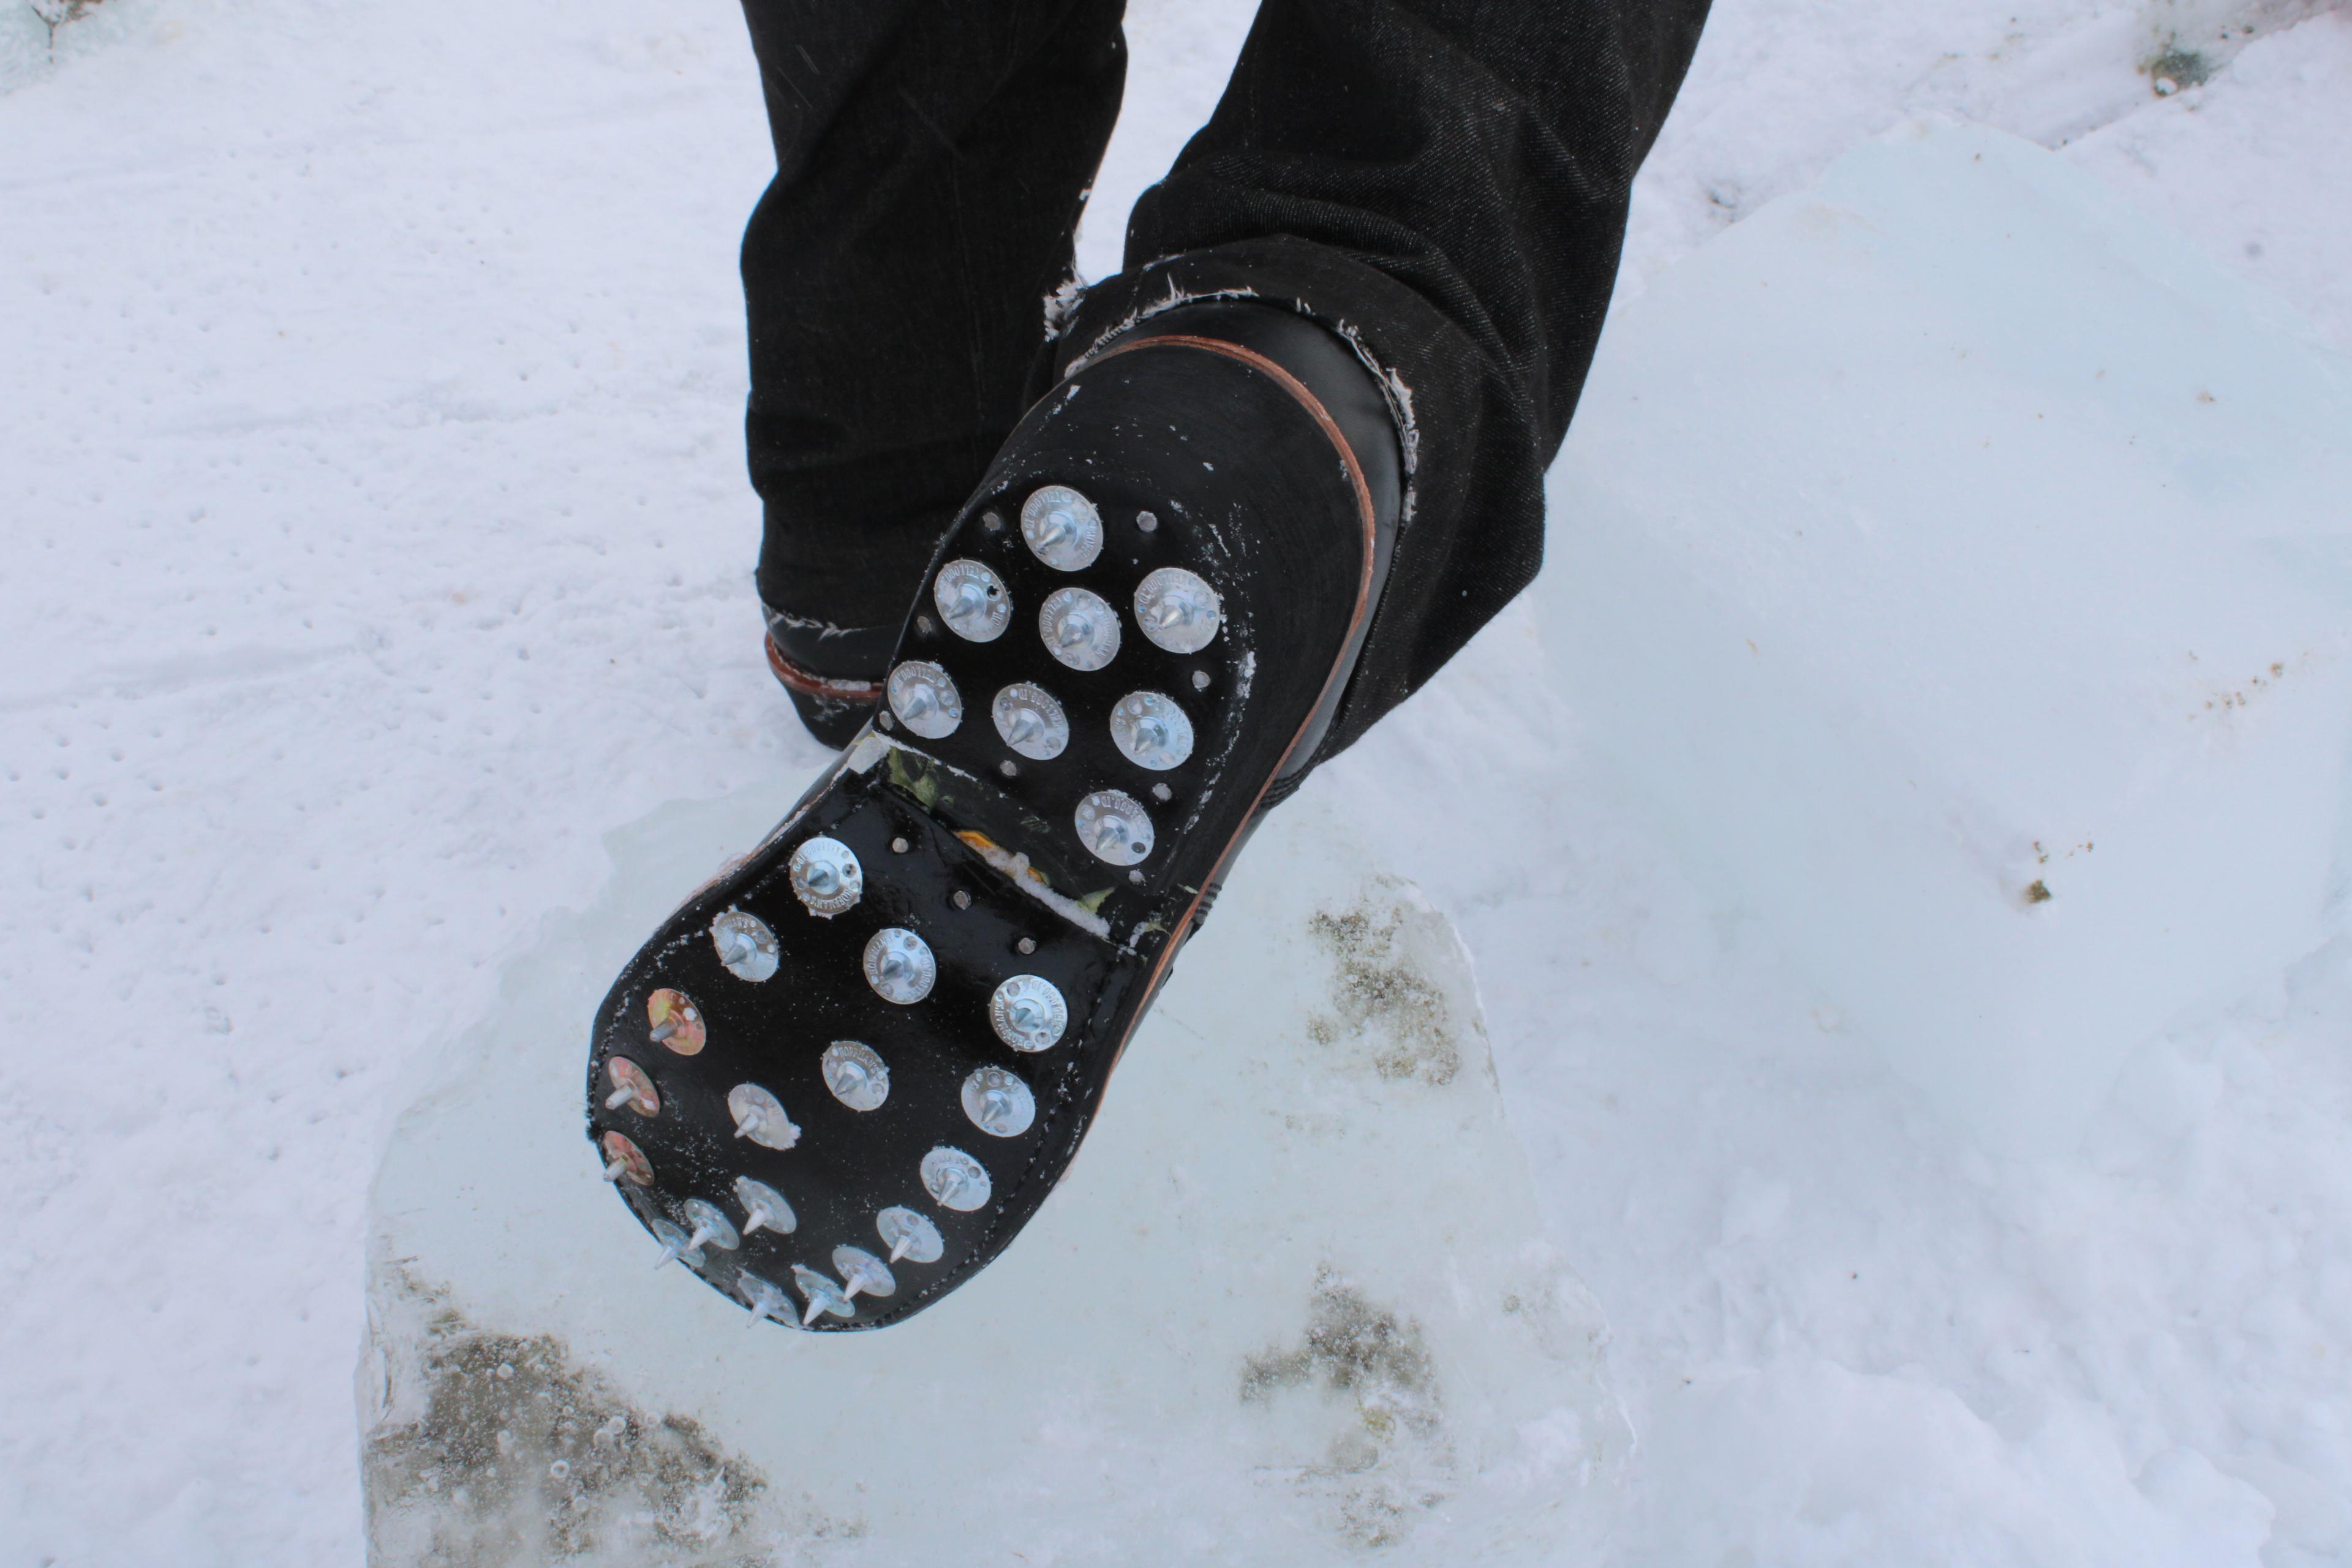 A man puts his foot on a block of ice to show the cleats on the bottom.